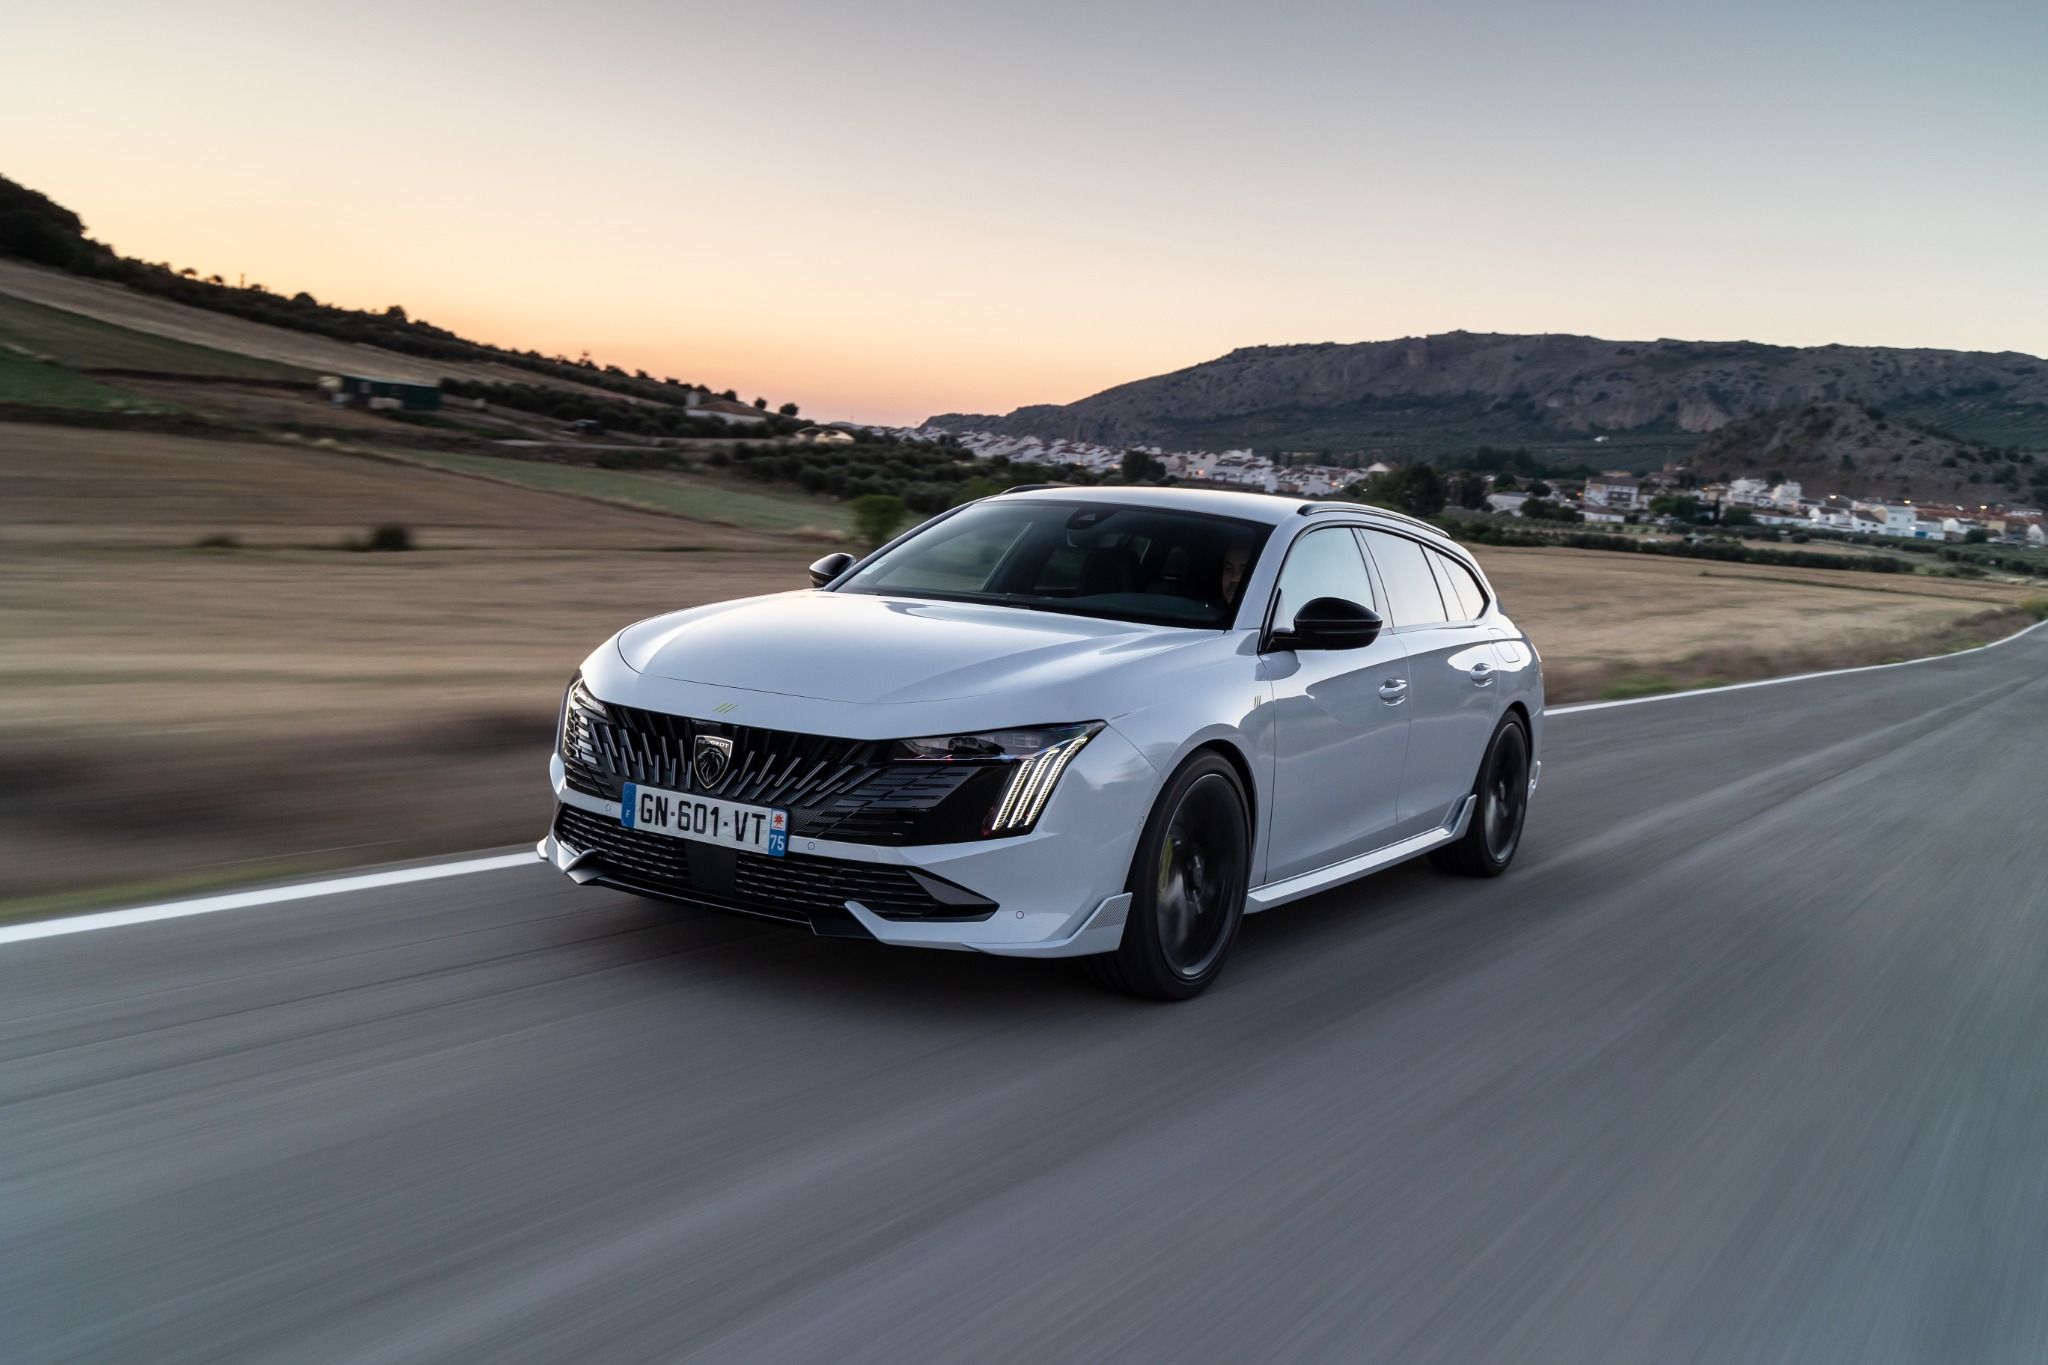 Peugeot 508 facelift: Everything you need to know